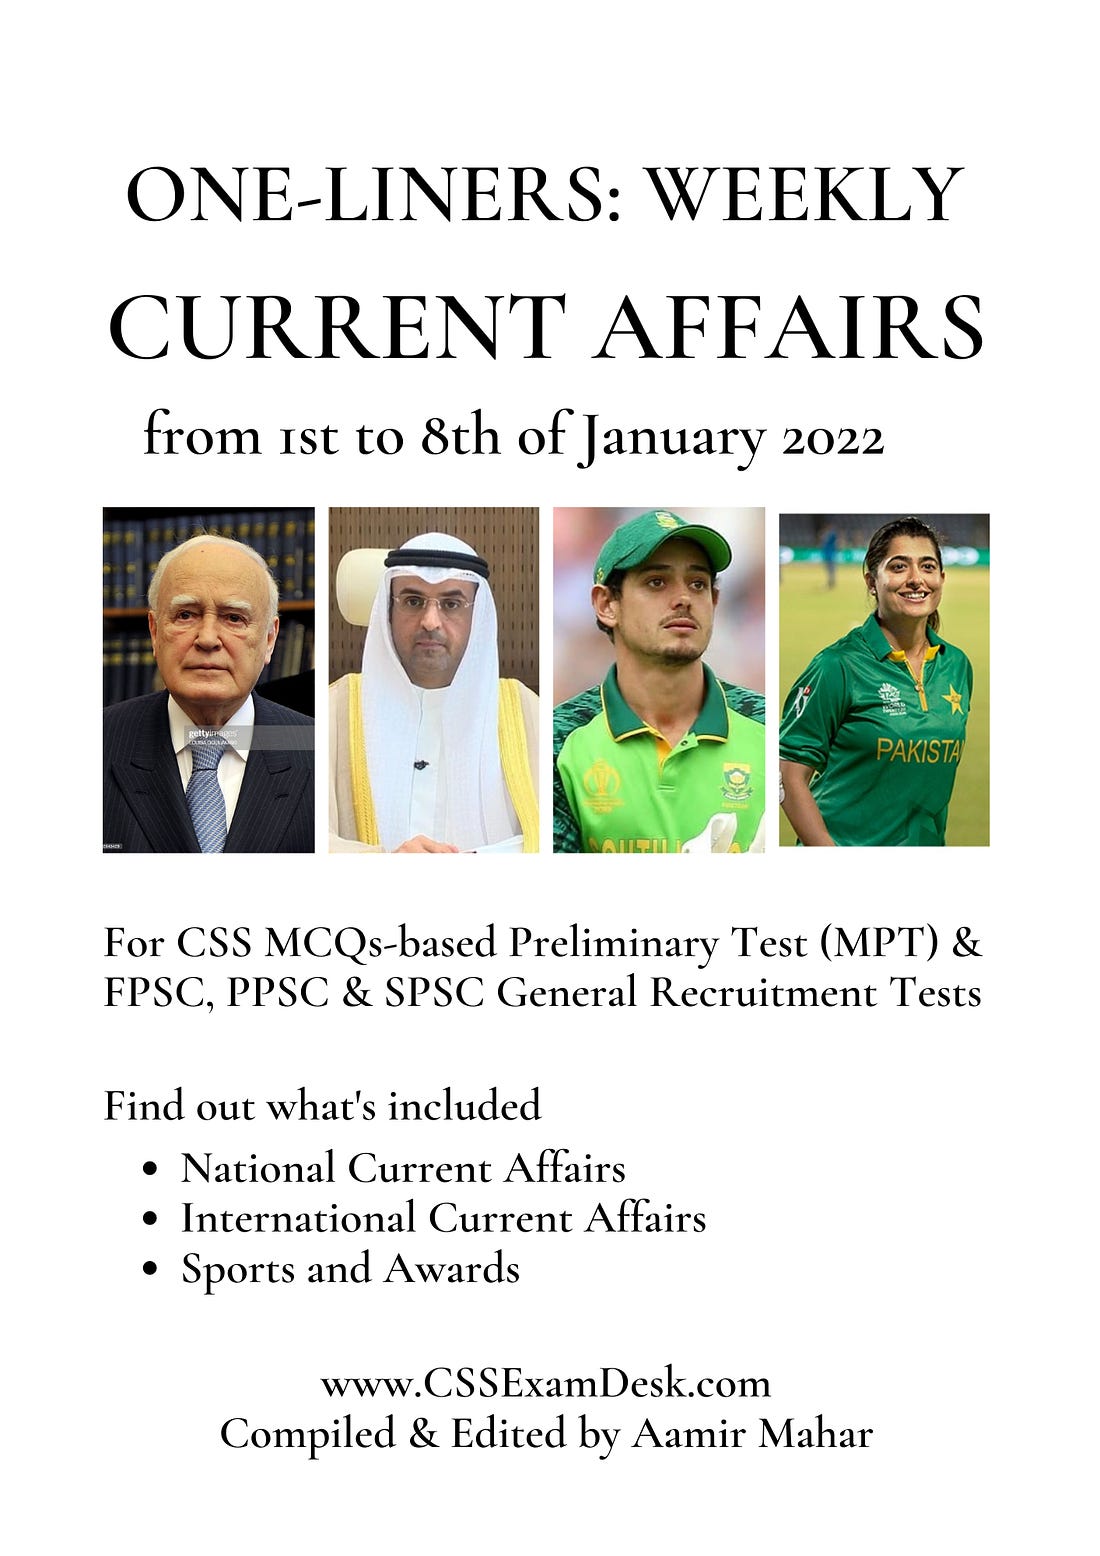 Weekly Current Affairs | 1st of January 2022 to 8th of January 2022